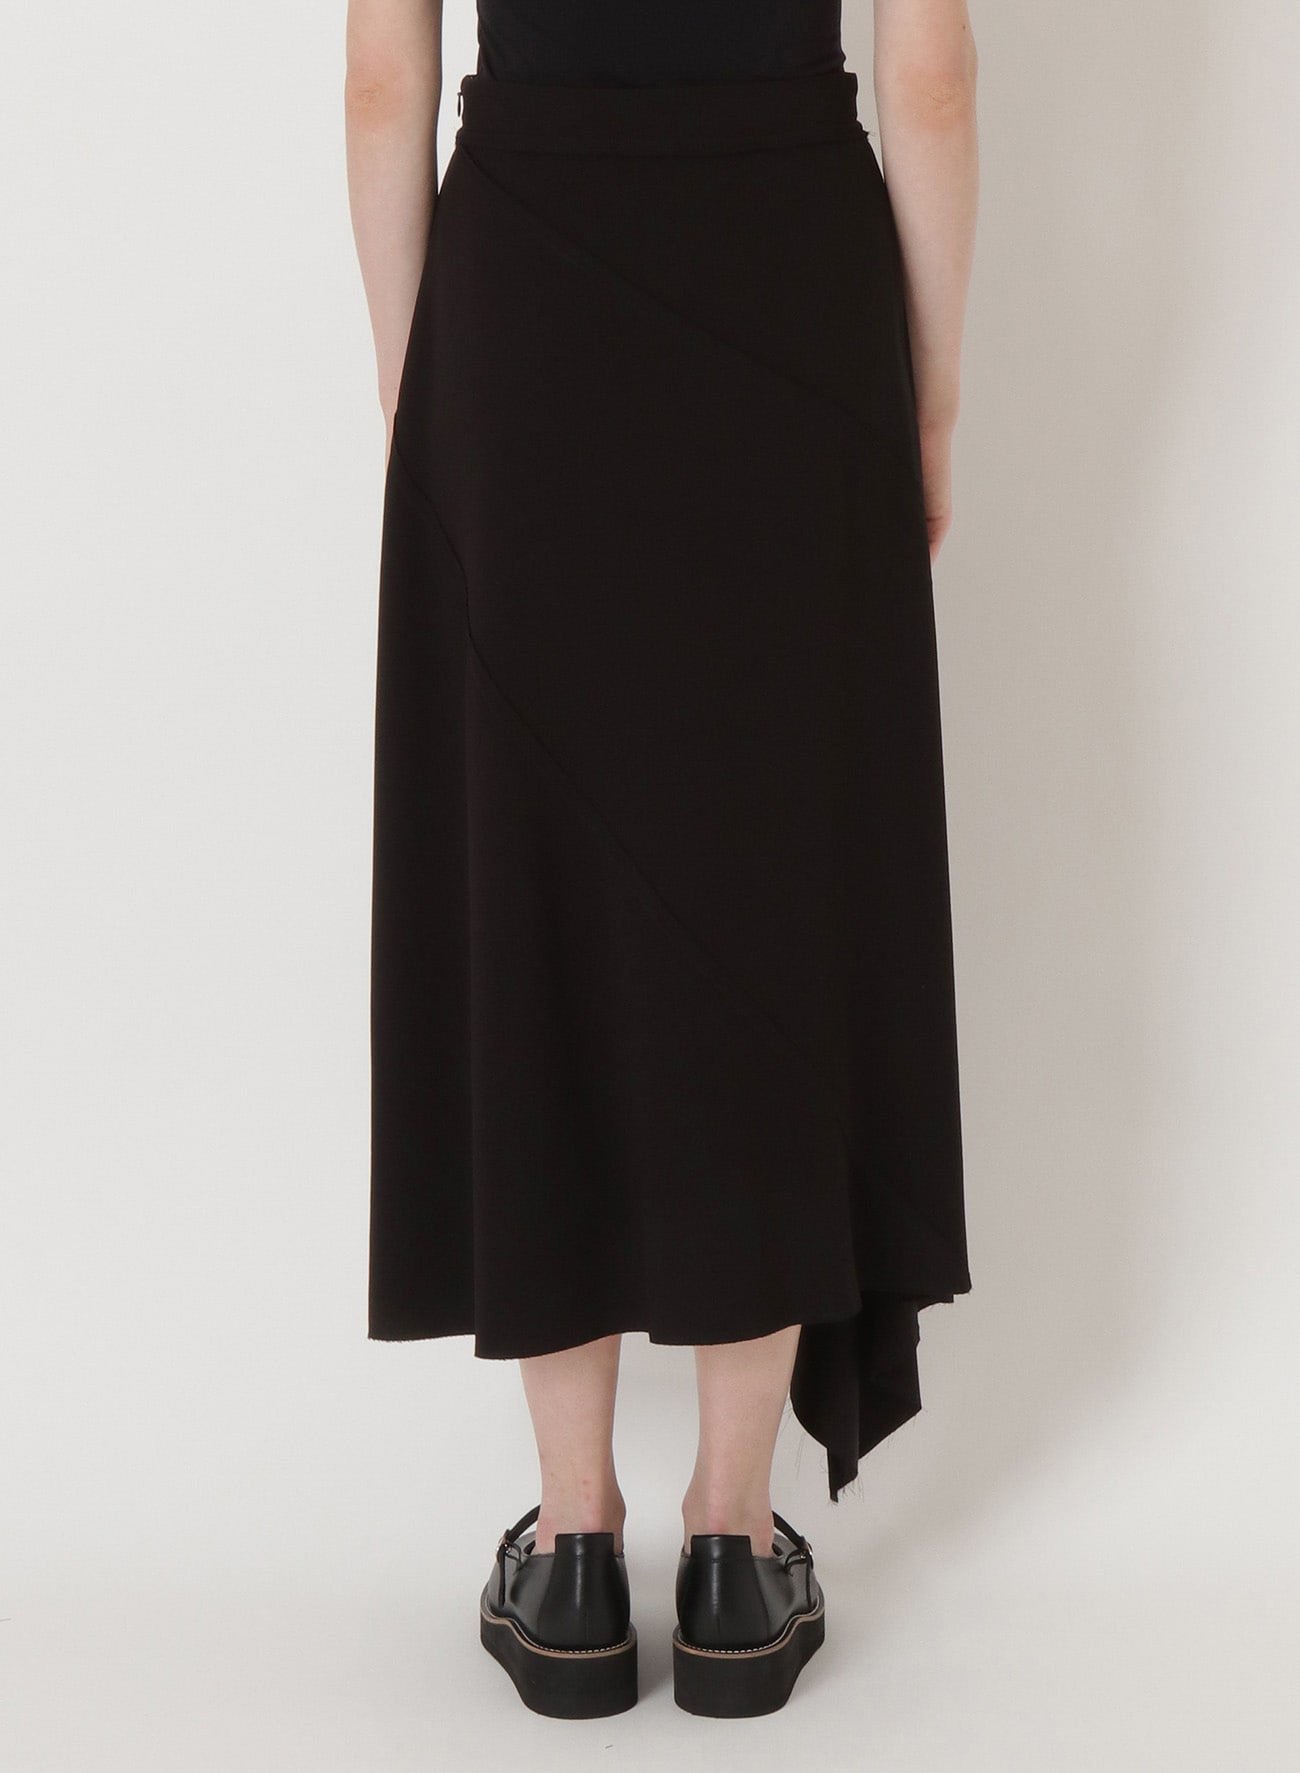 ACETATE POLYESTER GEORGETTE FLARE SKIRT